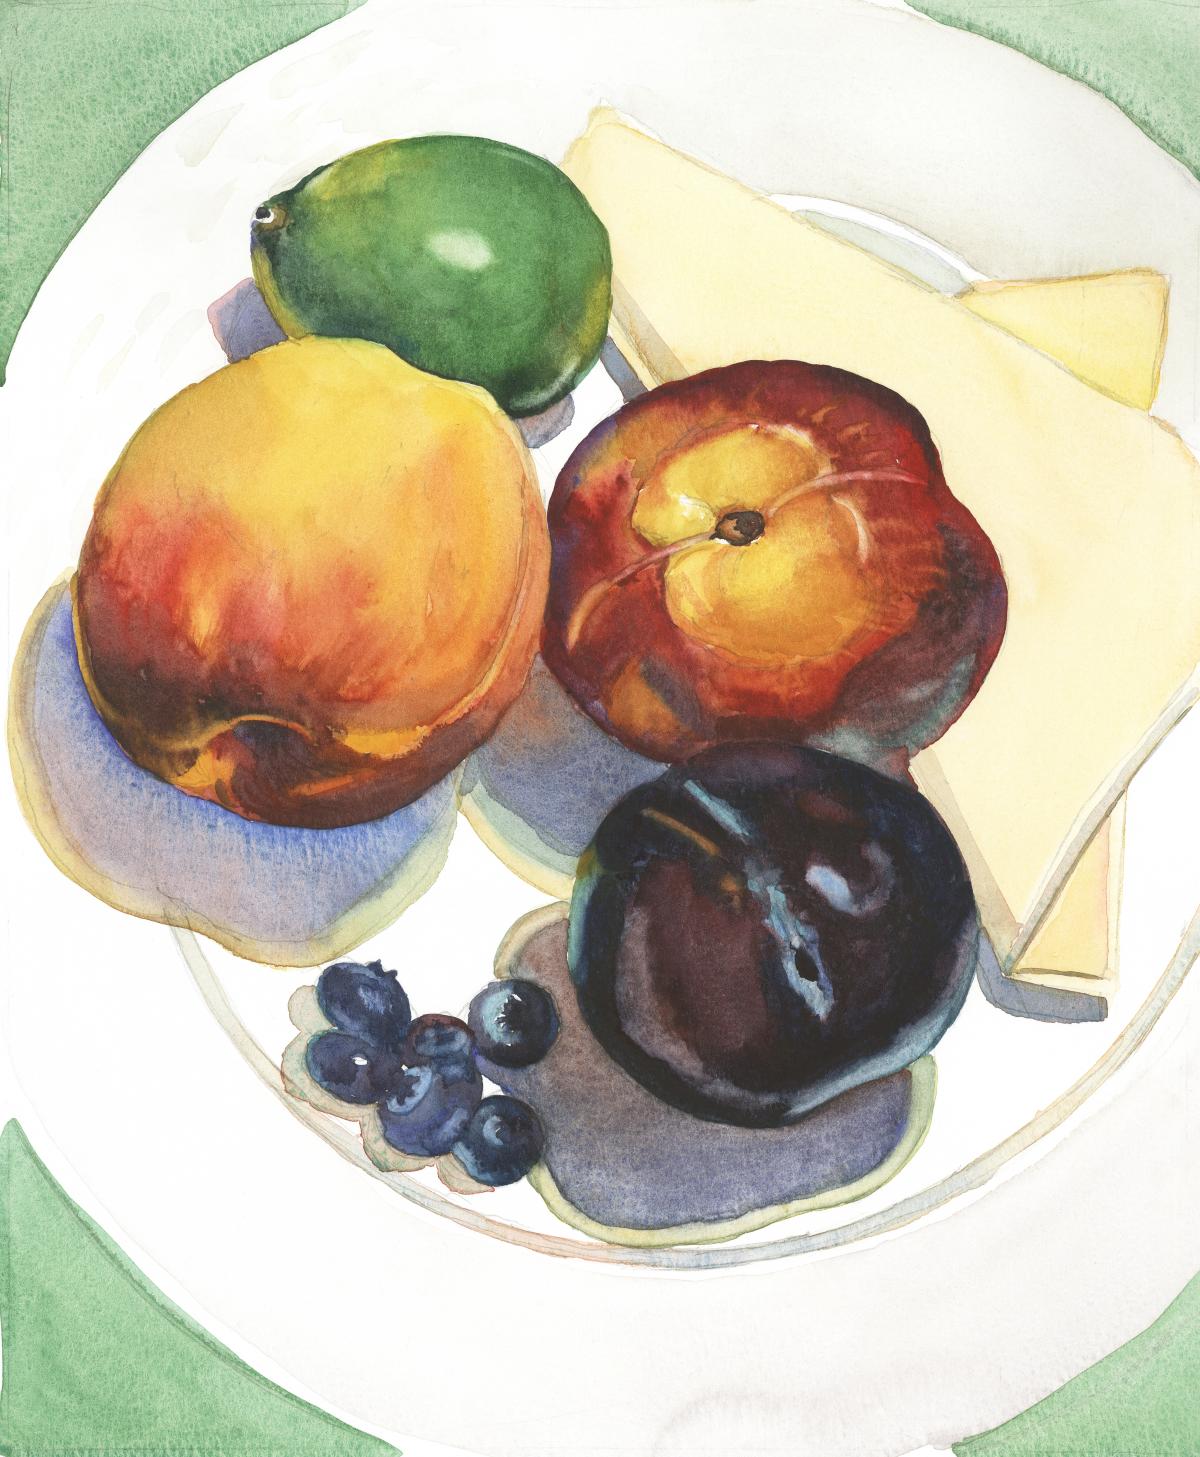 A deliberate, controlled exercise in detail and finesse of fruit surfaces, each of the colors, values, and textures of one fruit was completed in one sequence of brushwork.